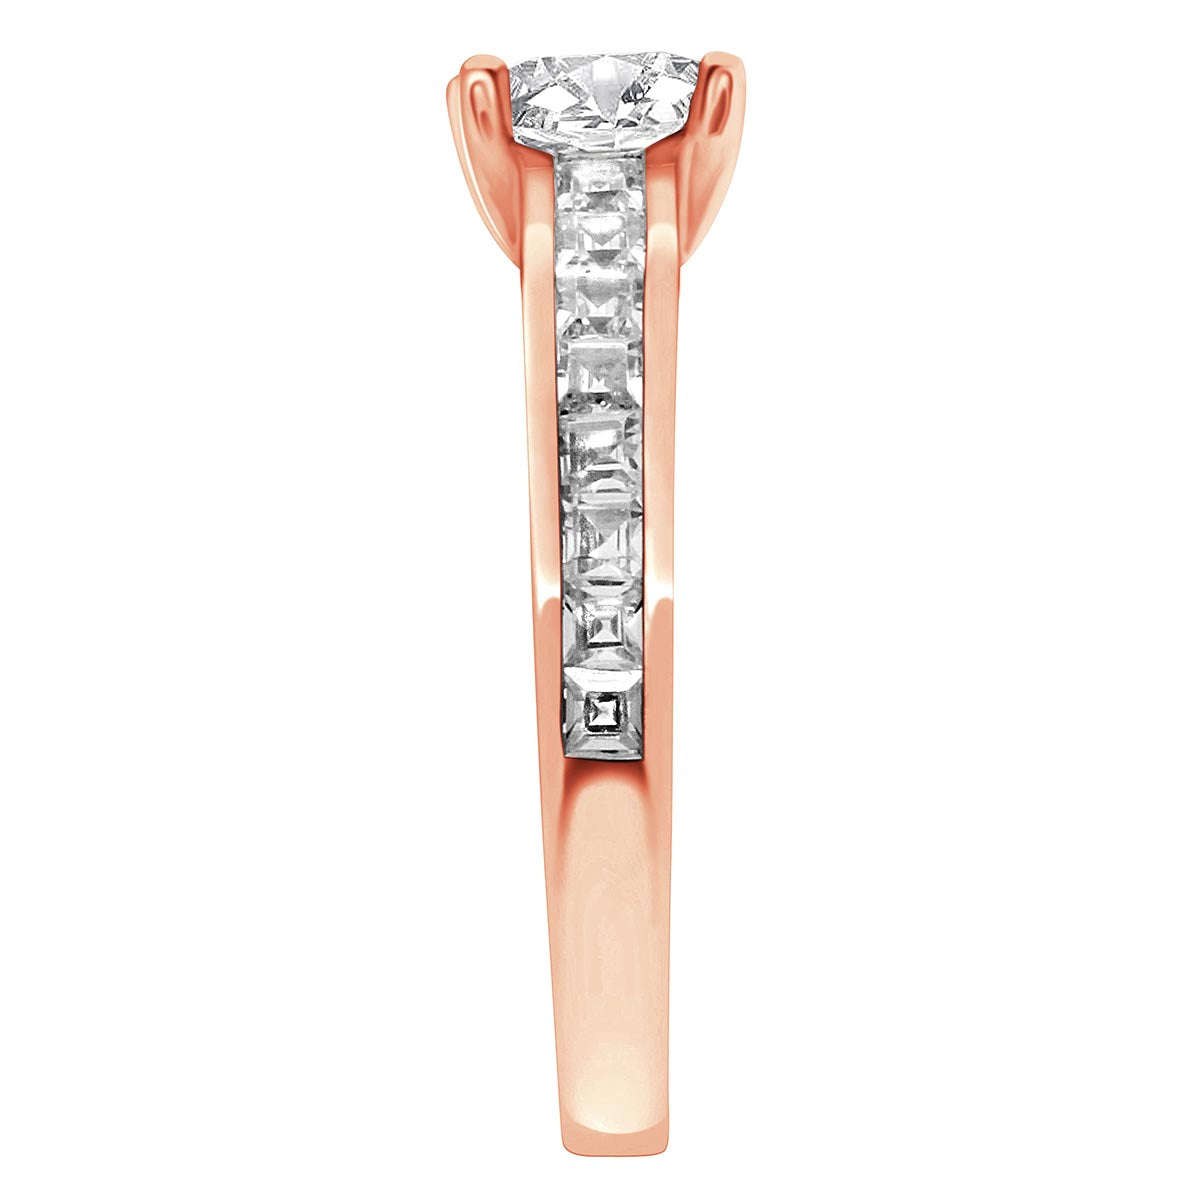 Princess Shape Diamond Ring made from rose gold pictured upright and from a side view